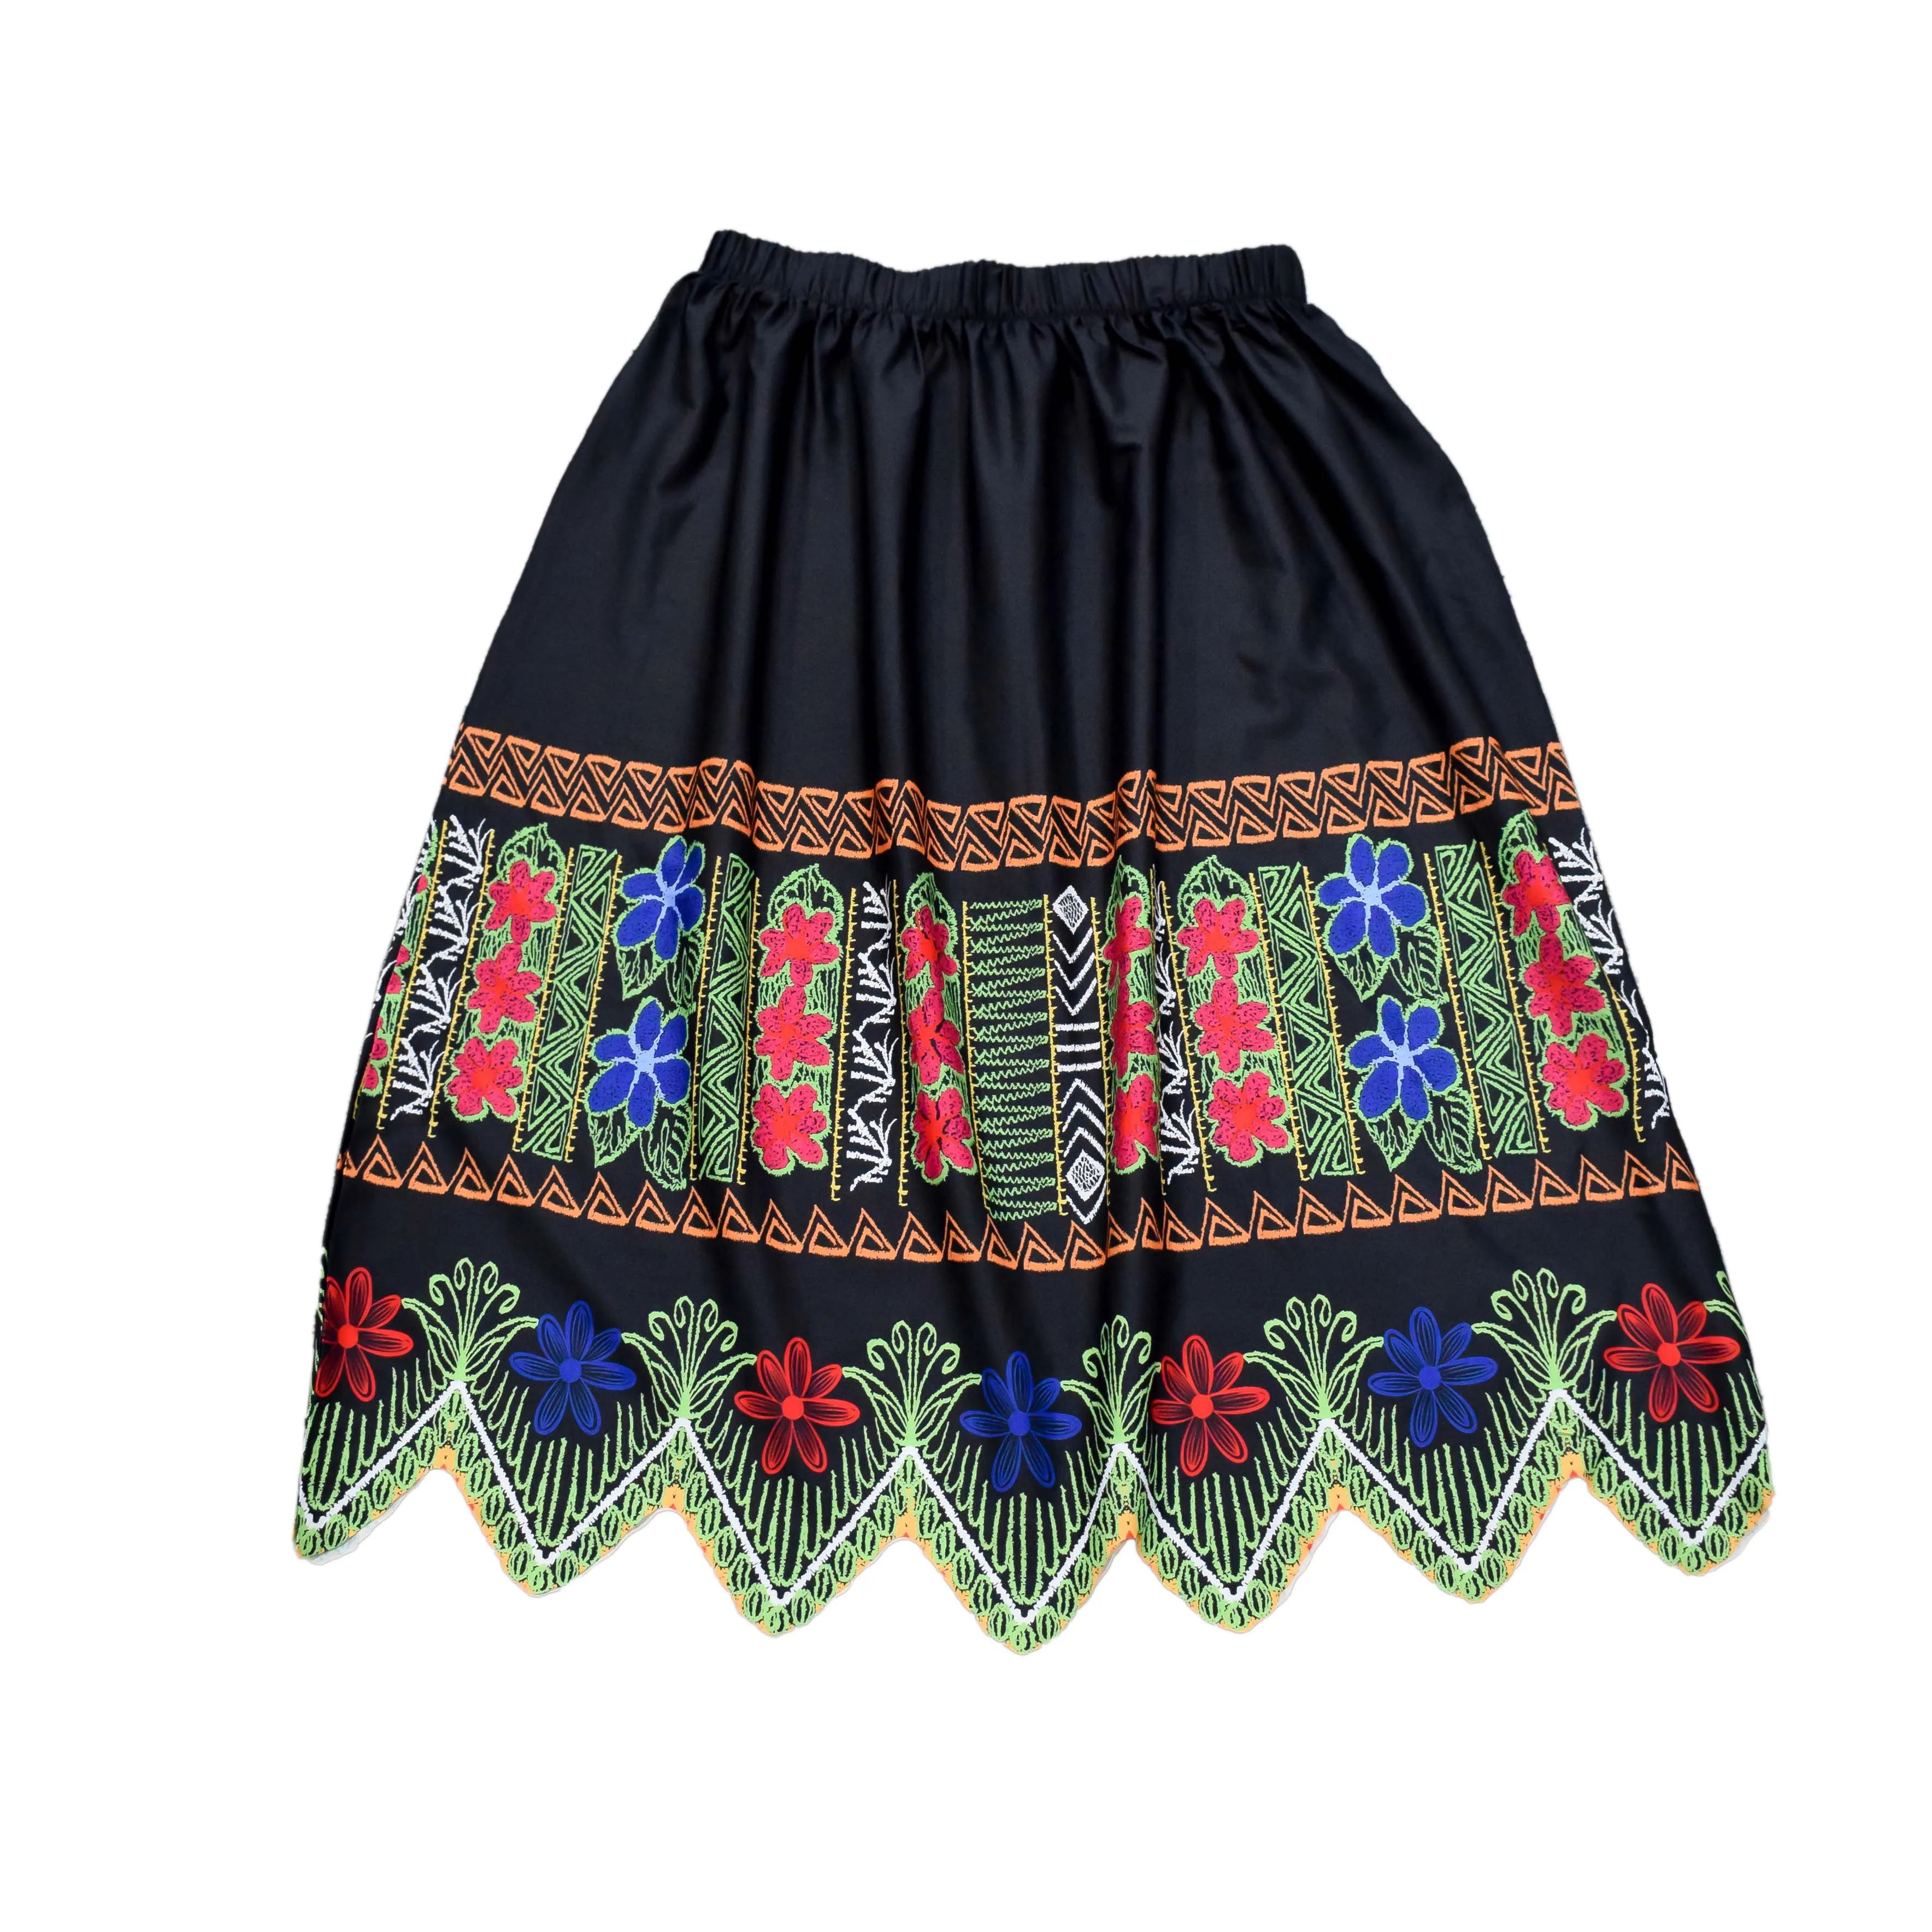 What's Trending: Shiny, Happy Skirts! | JFW Just for women